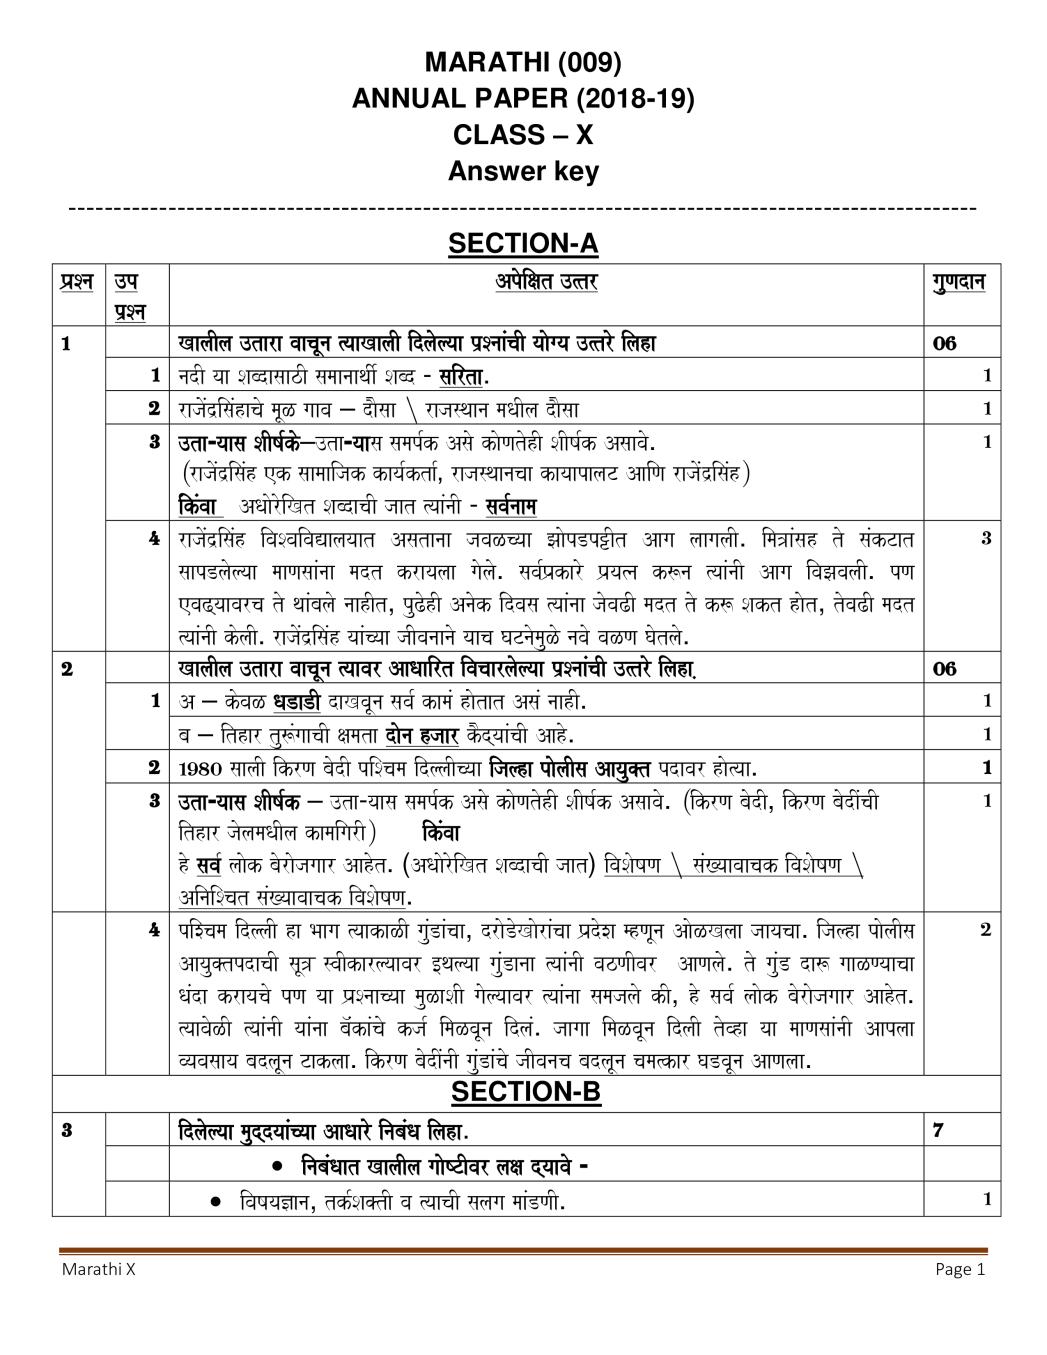 CBSE Class 10 Marathi Question Paper 2019 Solutions - Page 1